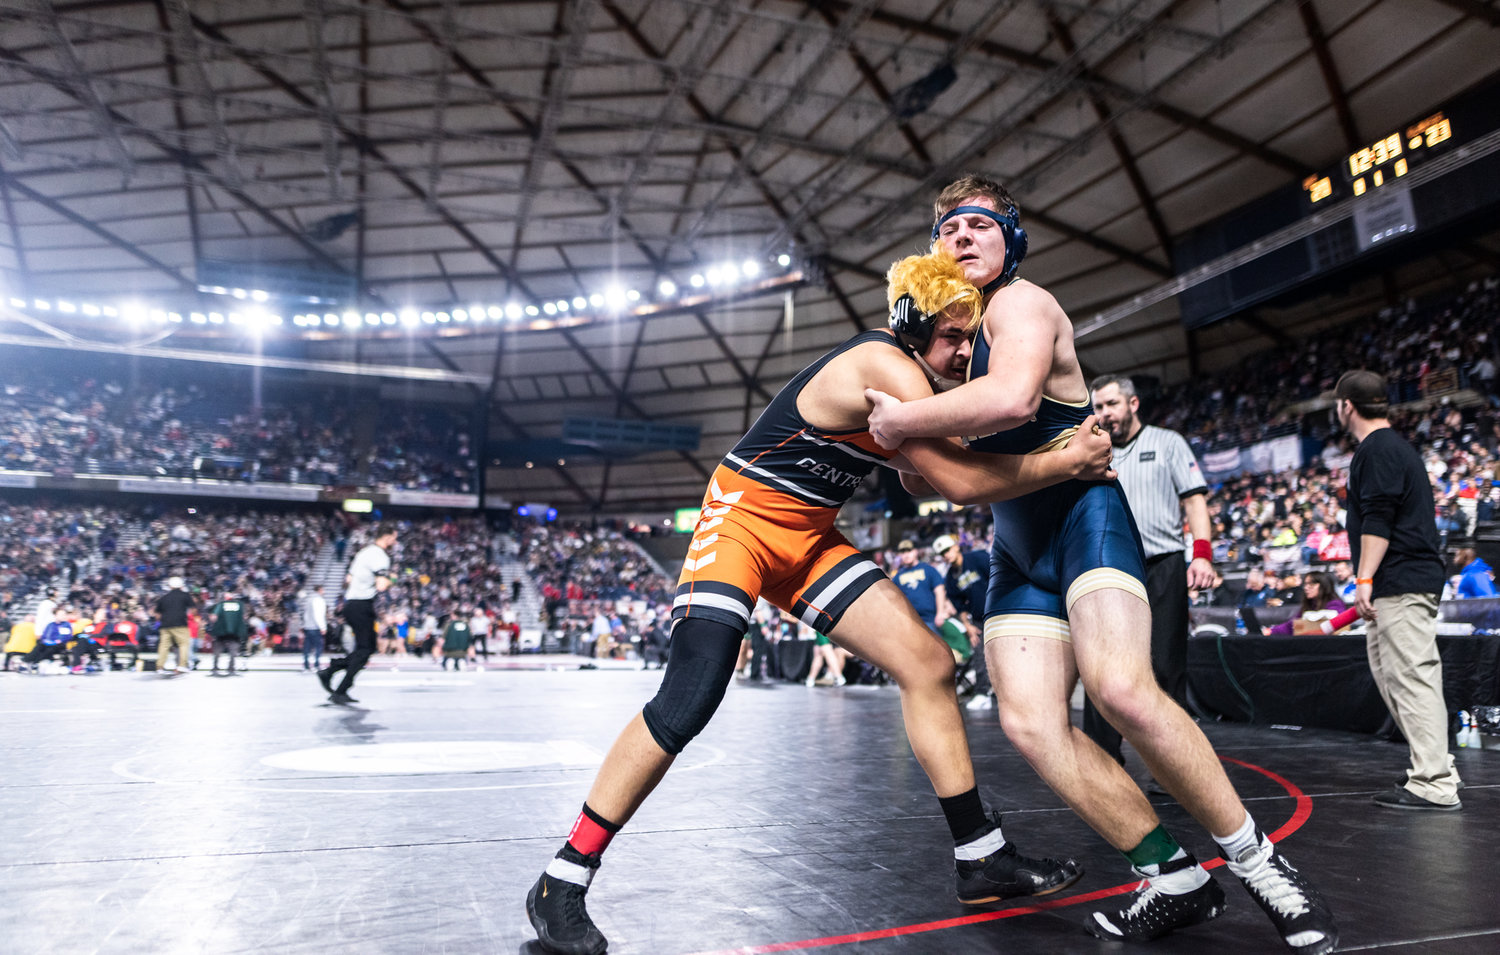 Centralia’s Eriberto Mojica, 220 pounds, competes at Mat Classic XXXIV on Friday, February 17, 2023, at the Tacoma Dome. (Joshua Hart/For The Chronicle)